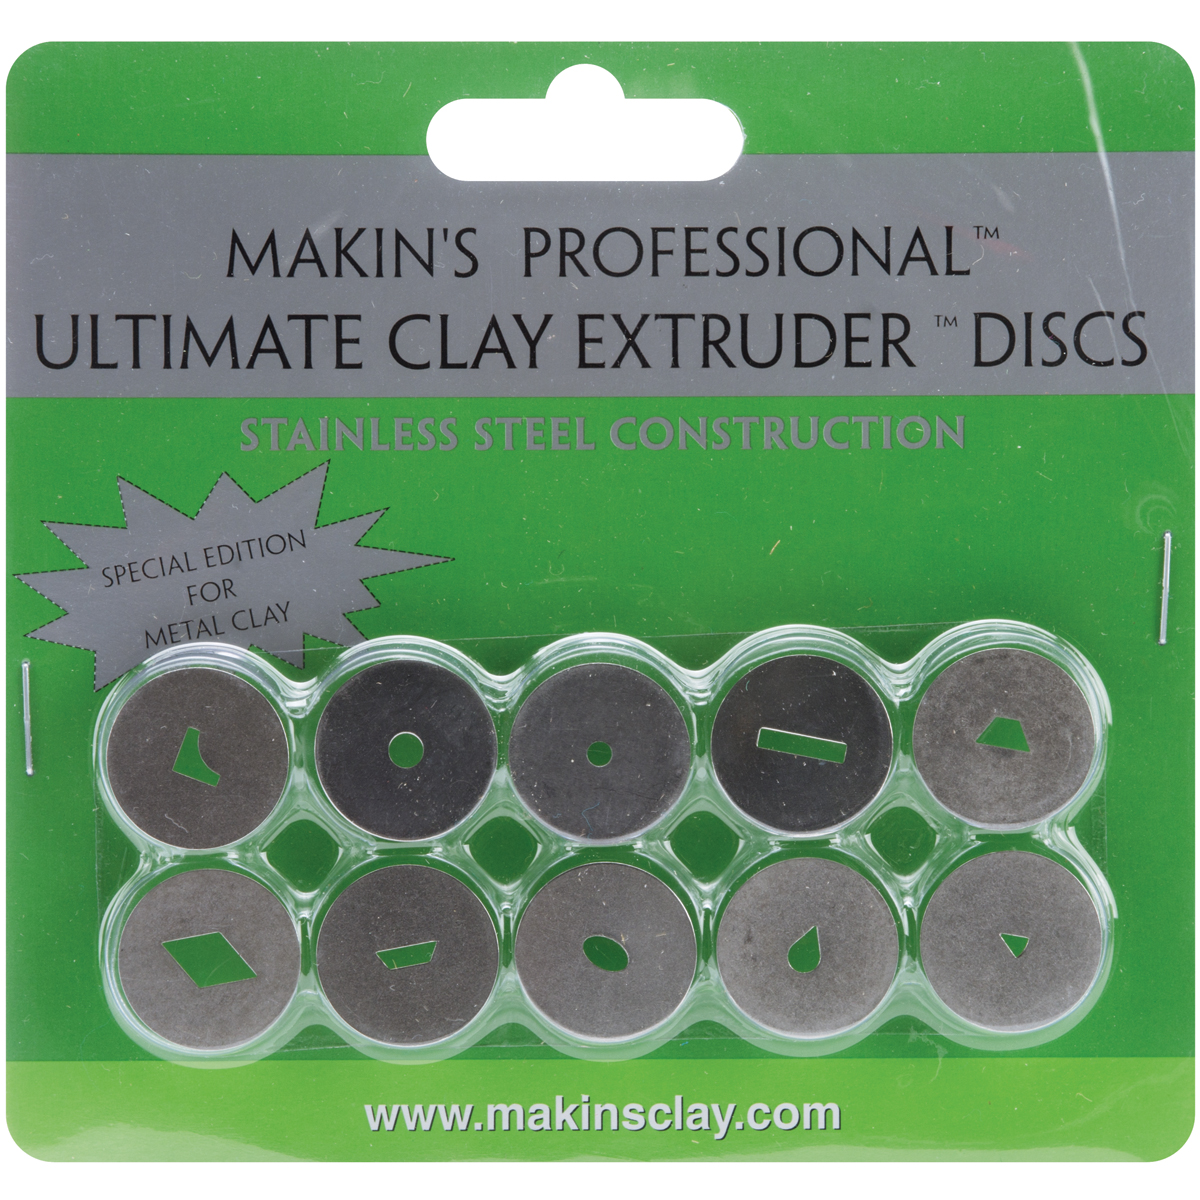 Makin's Professional Ultimate Clay Extruder Discs 10 Pkg, Stainless Steel.